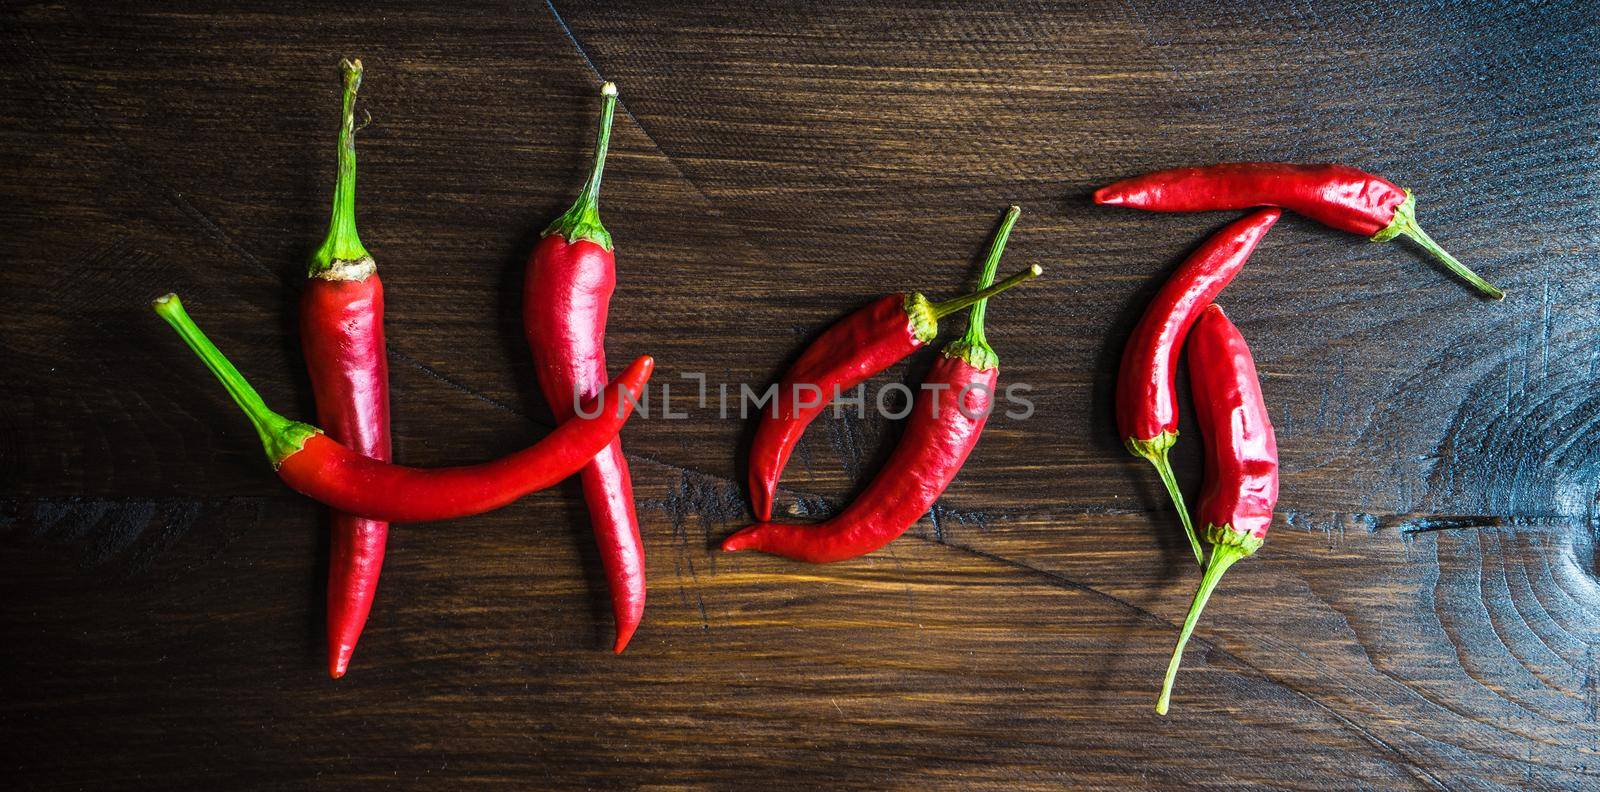 Organic chilli peppers on a pan on dark wooden background with copyspace